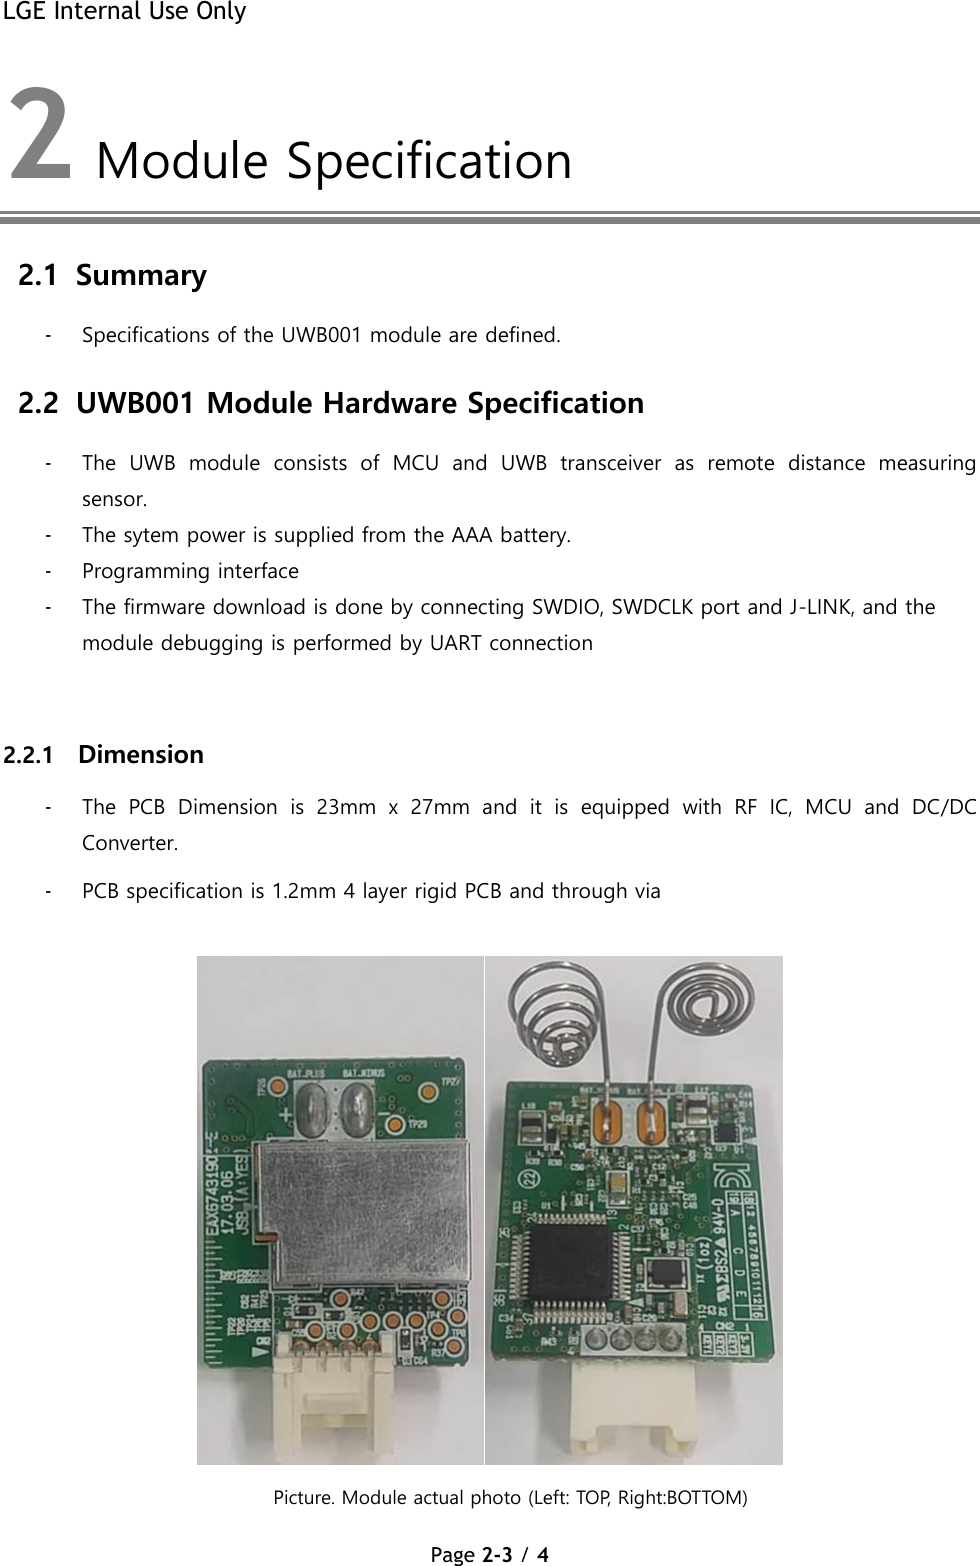 LGE Internal Use Only Page 2-3 / 4  2  Module Specification  2.1 Summary - Specifications of the UWB001 module are defined. 2.2 UWB001 Module Hardware Specification  - The  UWB  module  consists  of  MCU  and  UWB  transceiver  as  remote  distance  measuring sensor. - The sytem power is supplied from the AAA battery. - Programming interface - The firmware download is done by connecting SWDIO, SWDCLK port and J-LINK, and the module debugging is performed by UART connection   2.2.1 Dimension  - The  PCB  Dimension  is  23mm  x  27mm  and  it  is  equipped  with  RF  IC,  MCU  and  DC/DC Converter. - PCB specification is 1.2mm 4 layer rigid PCB and through via    Picture. Module actual photo (Left: TOP, Right:BOTTOM) 